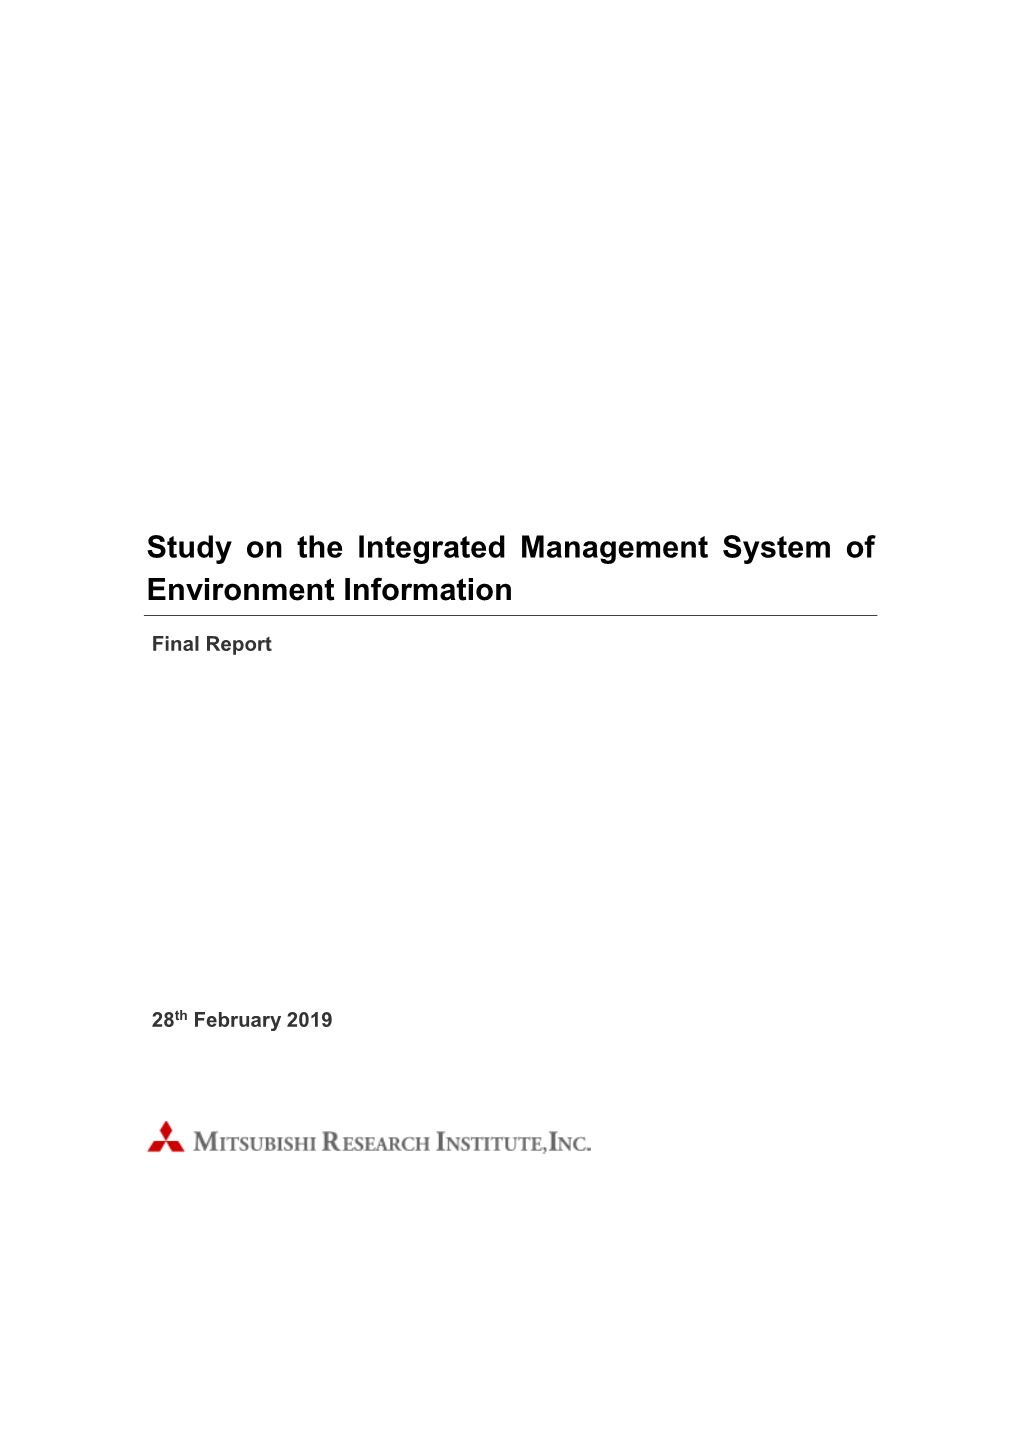 Study on the Integrated Management System of Environment Information